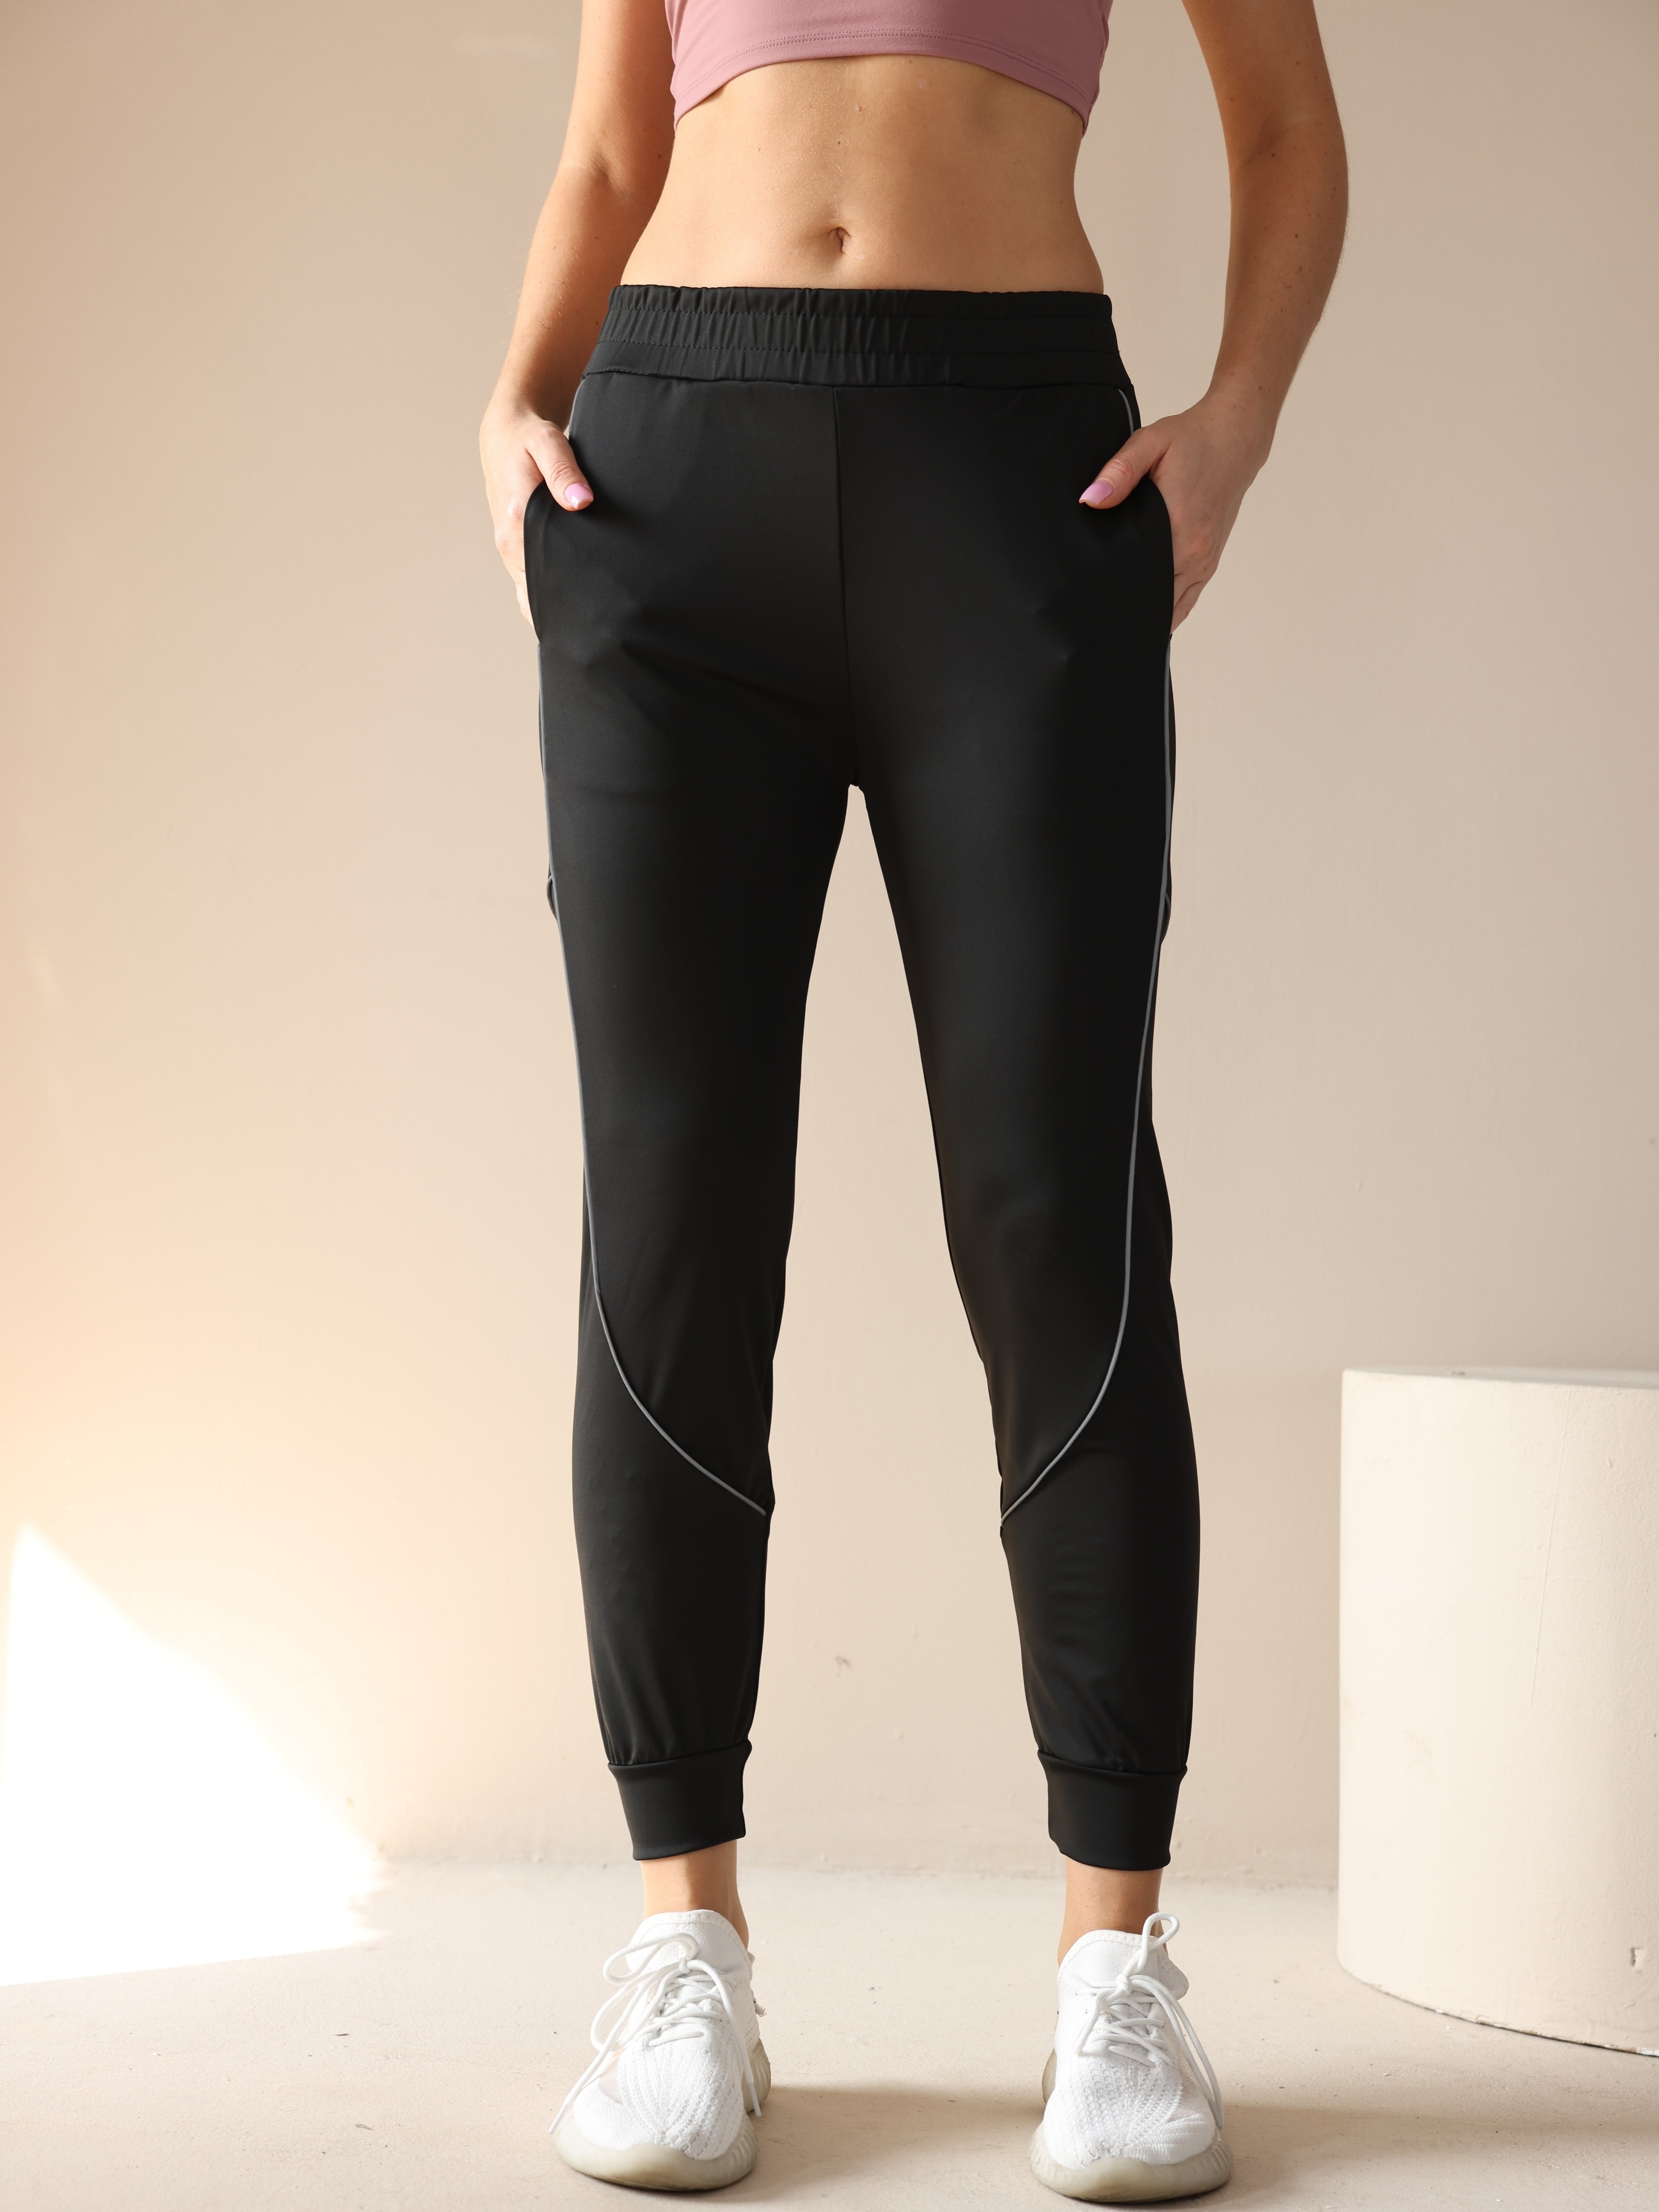 Reflections - Joggers for Girls